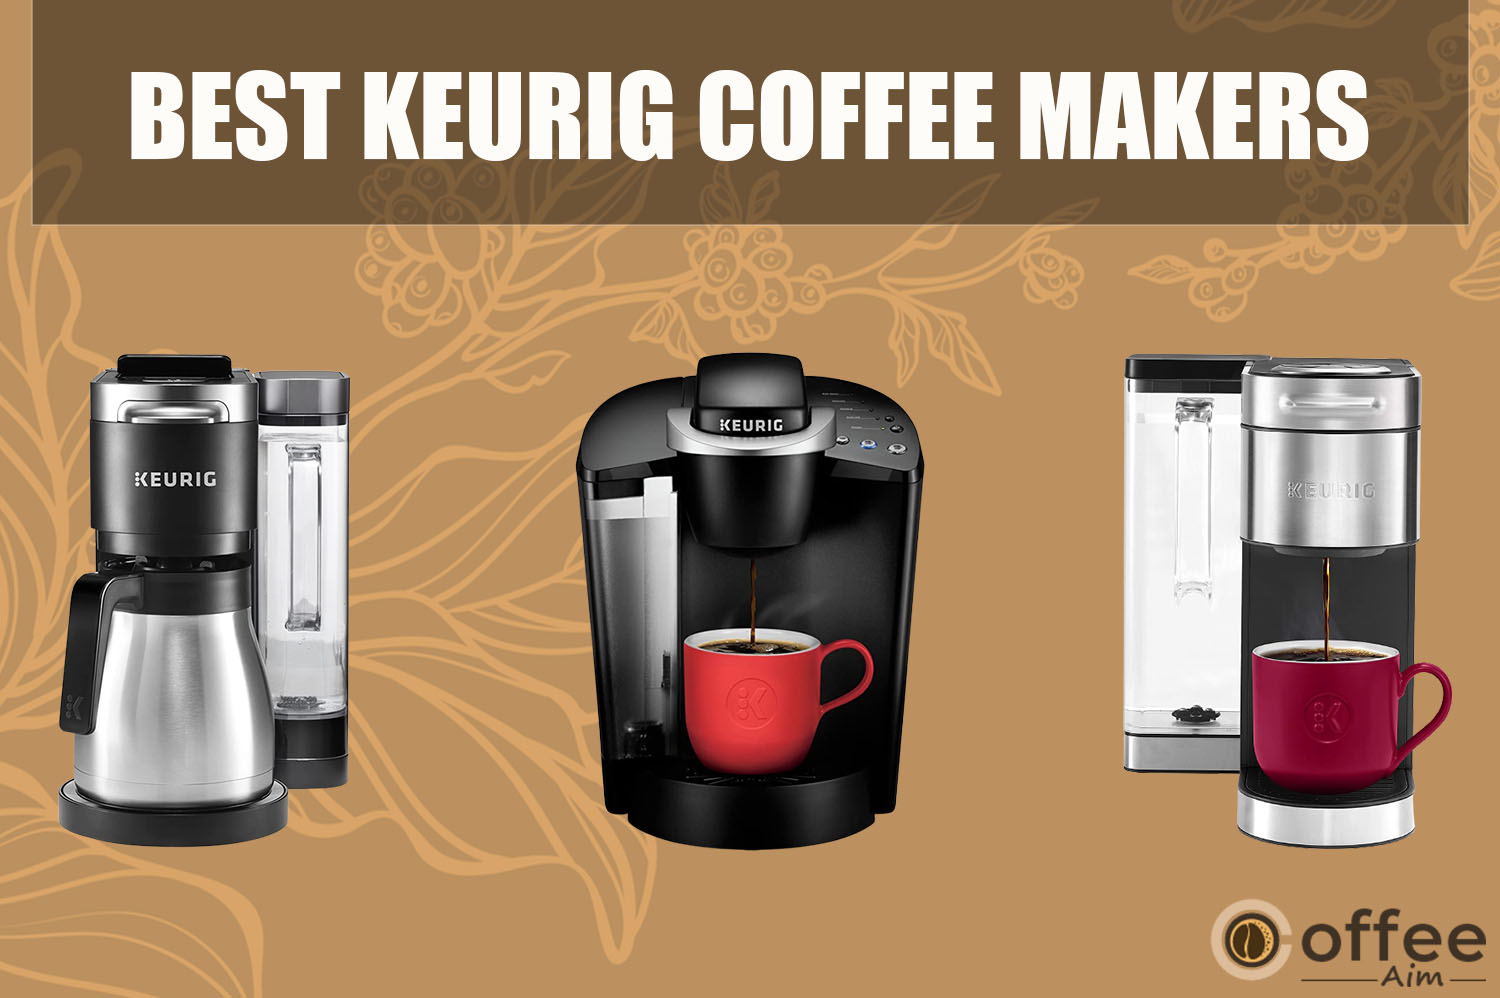 Featured image for the article "Best Keurig Coffee Makers"